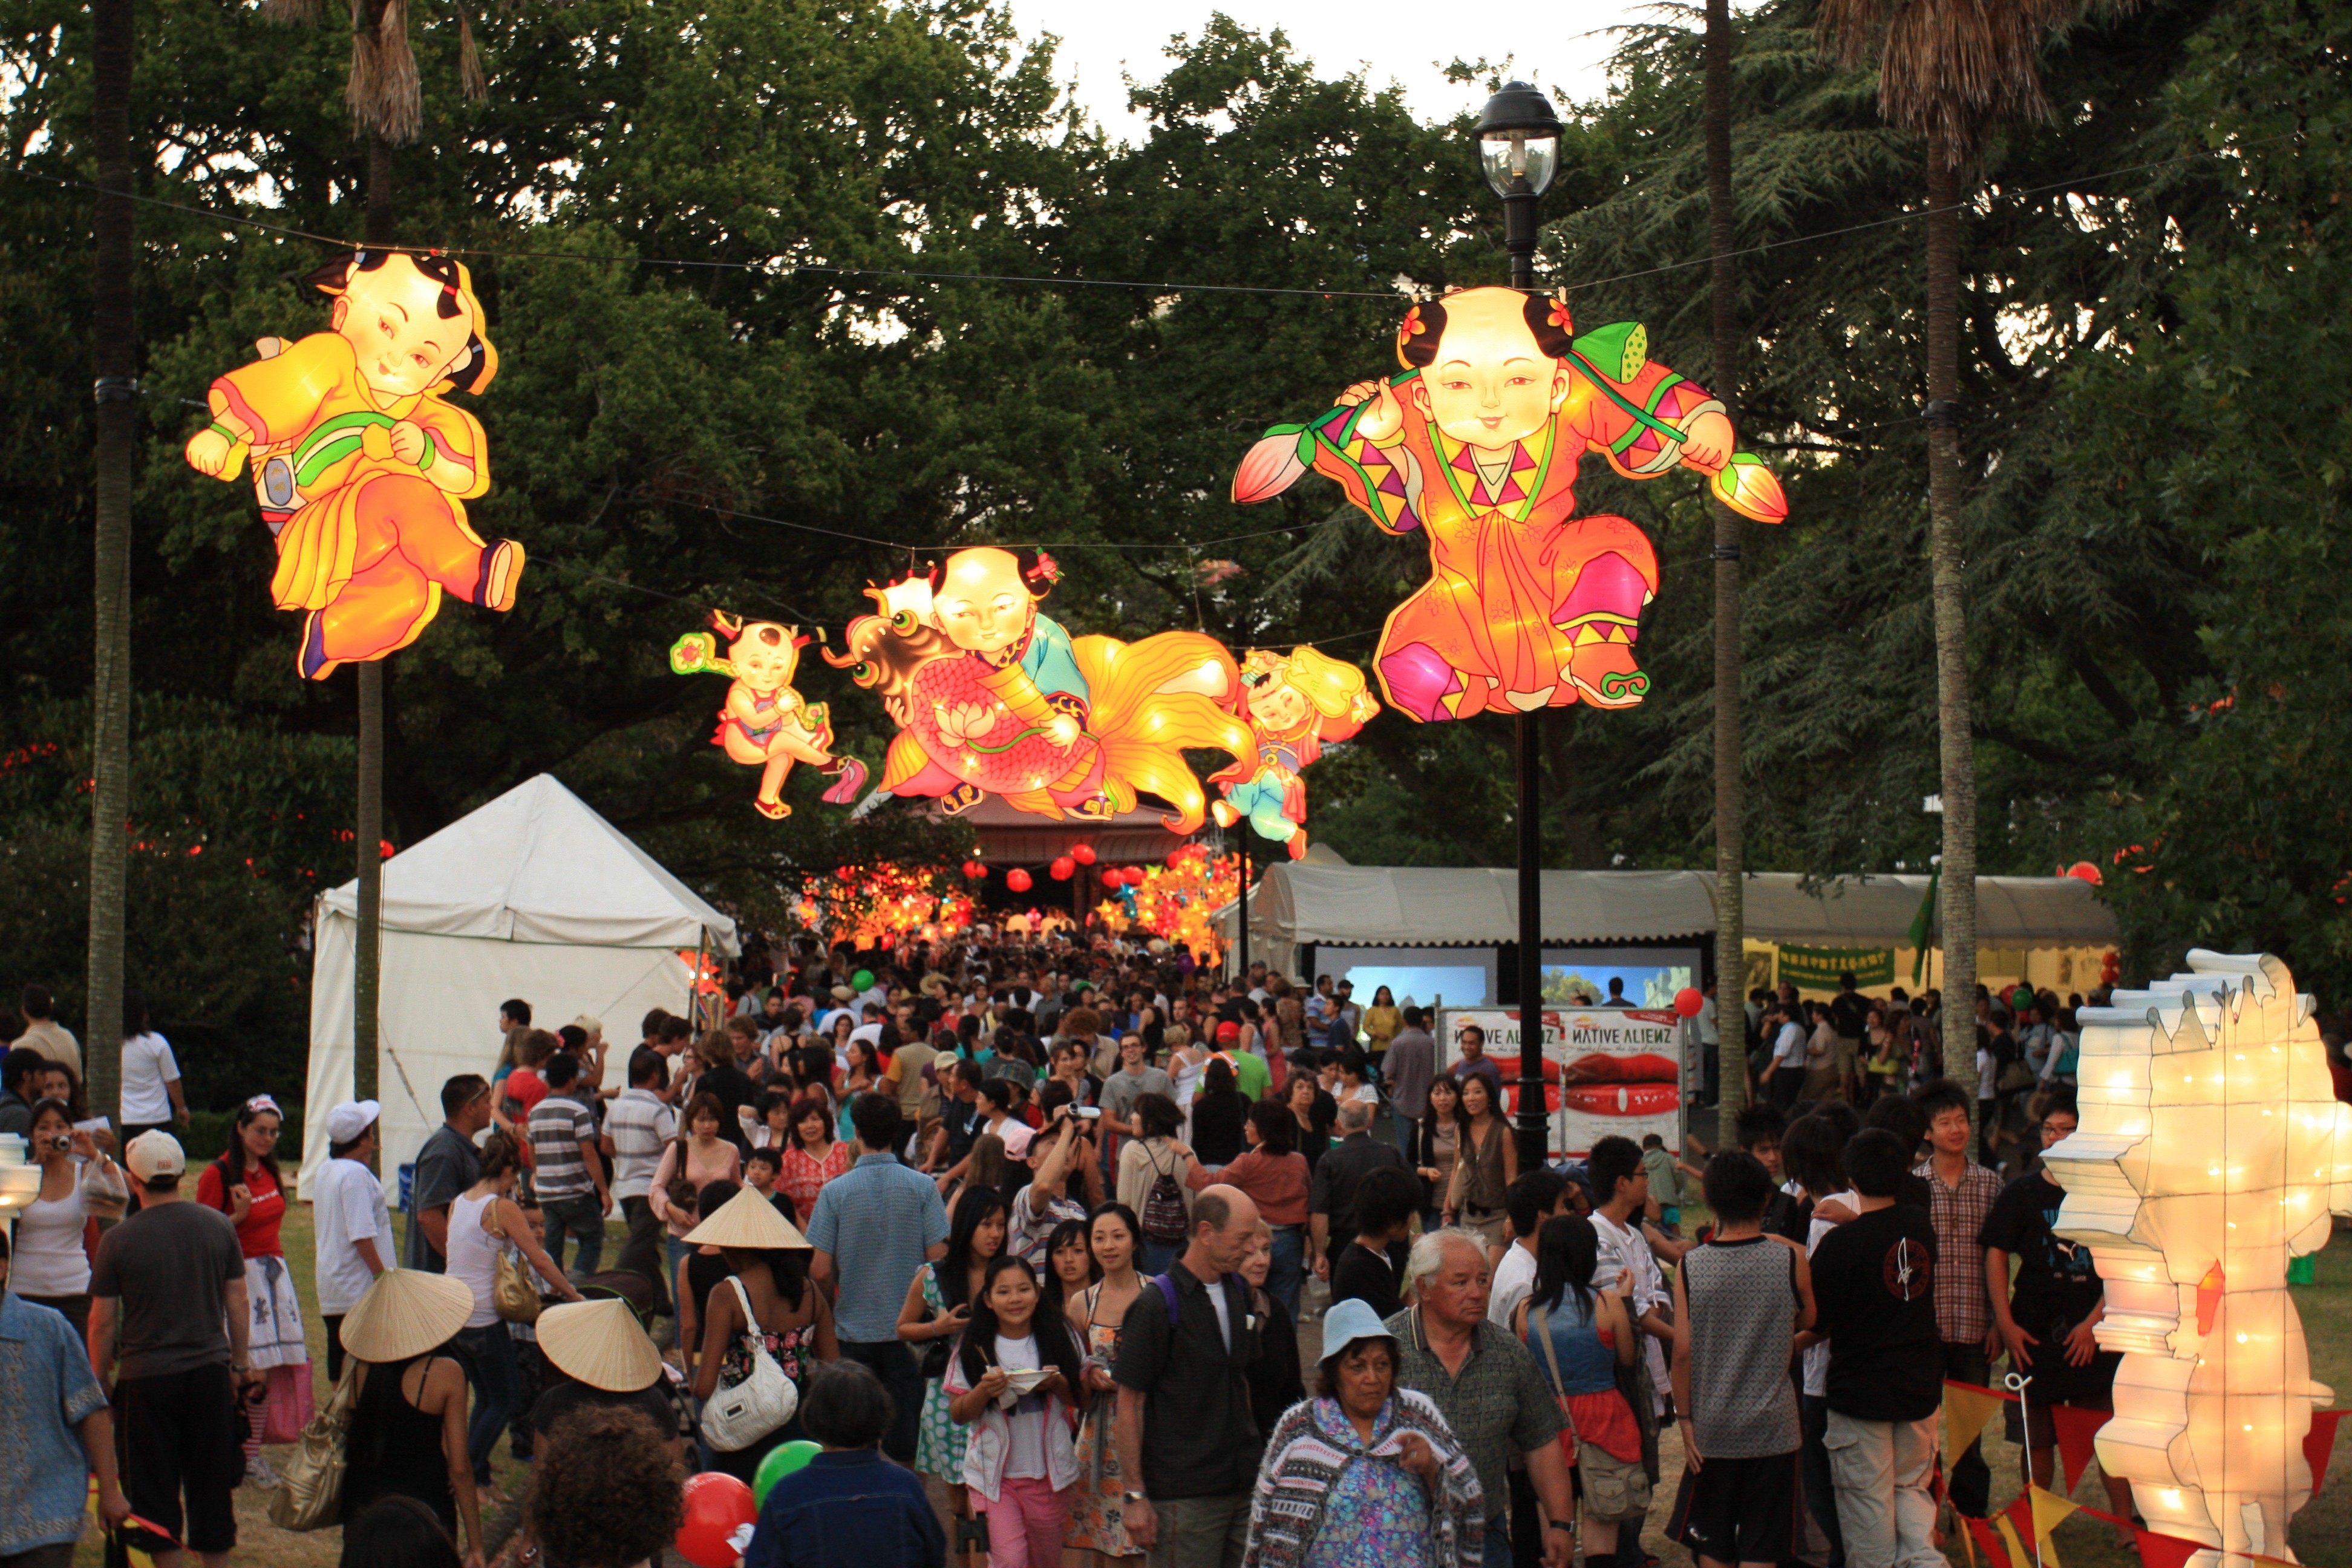 Illuminated Chinese lanterns hang above a crowd of people surrounded by trees